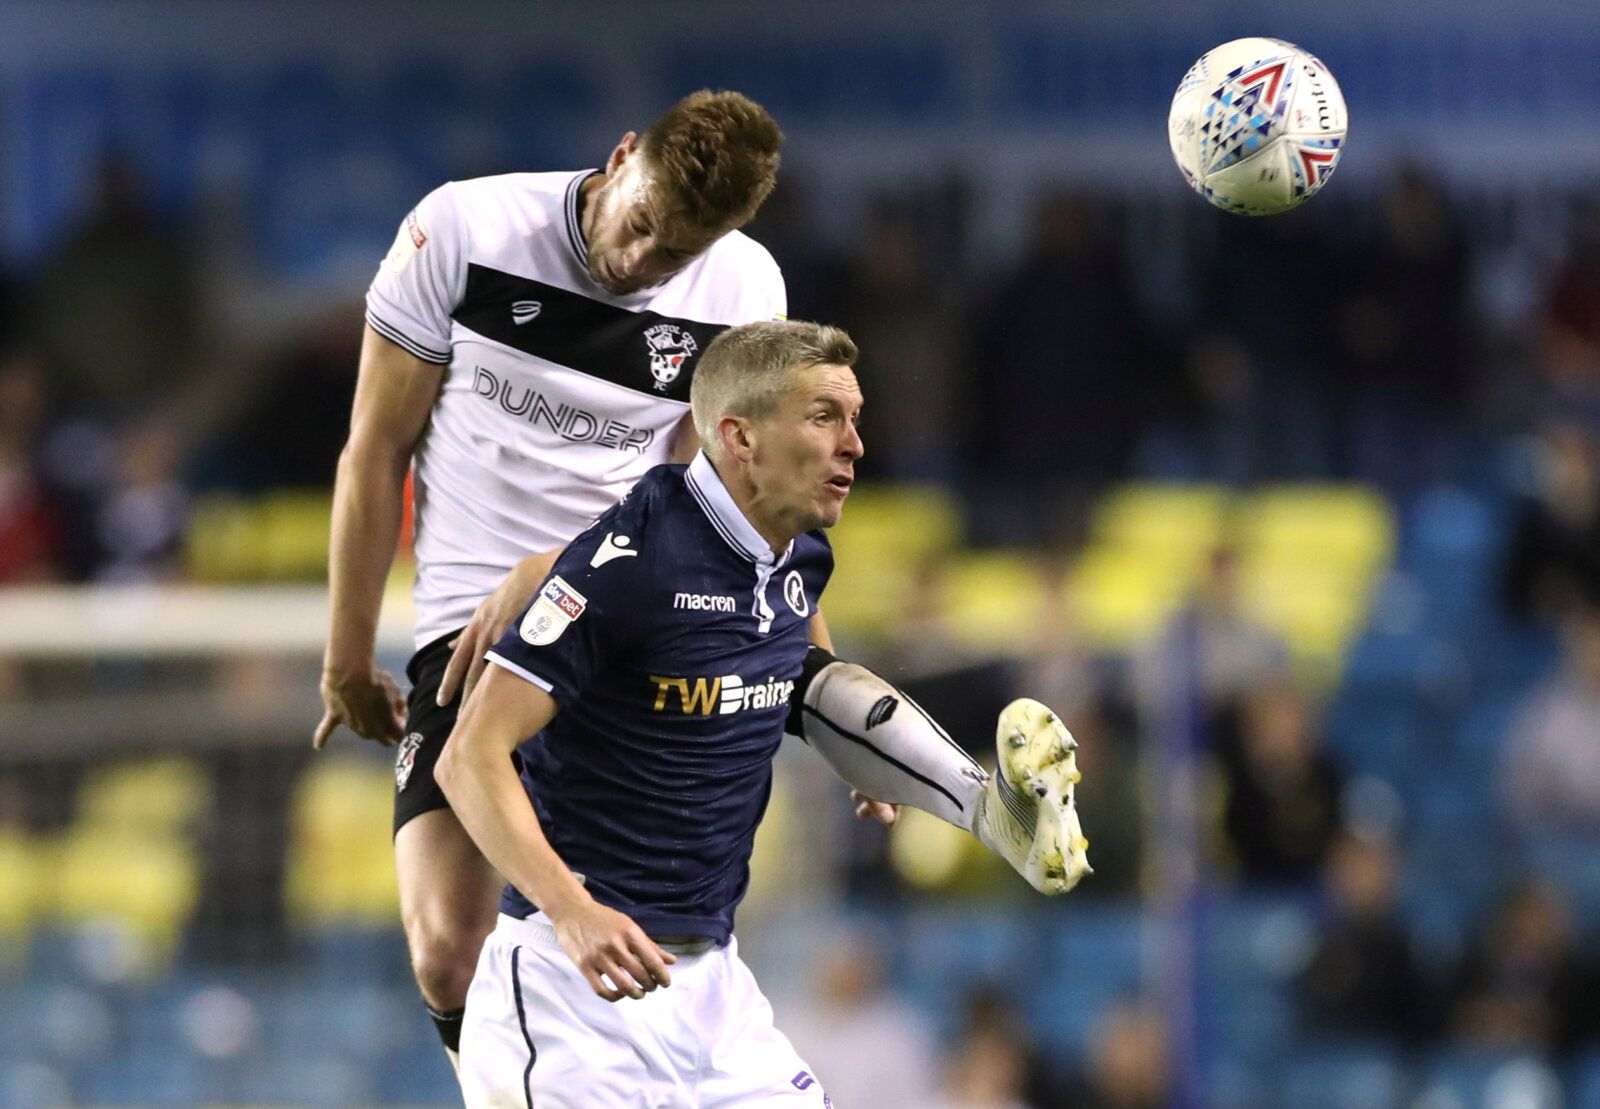 Soccer Football - Championship - Millwall v Bristol City - The Den, London, Britain - April 30, 2019   Millwall's Steve Morison in action with Bristol City's Adam Webster   Action Images/Peter Cziborra    EDITORIAL USE ONLY. No use with unauthorized audio, video, data, fixture lists, club/league logos or 